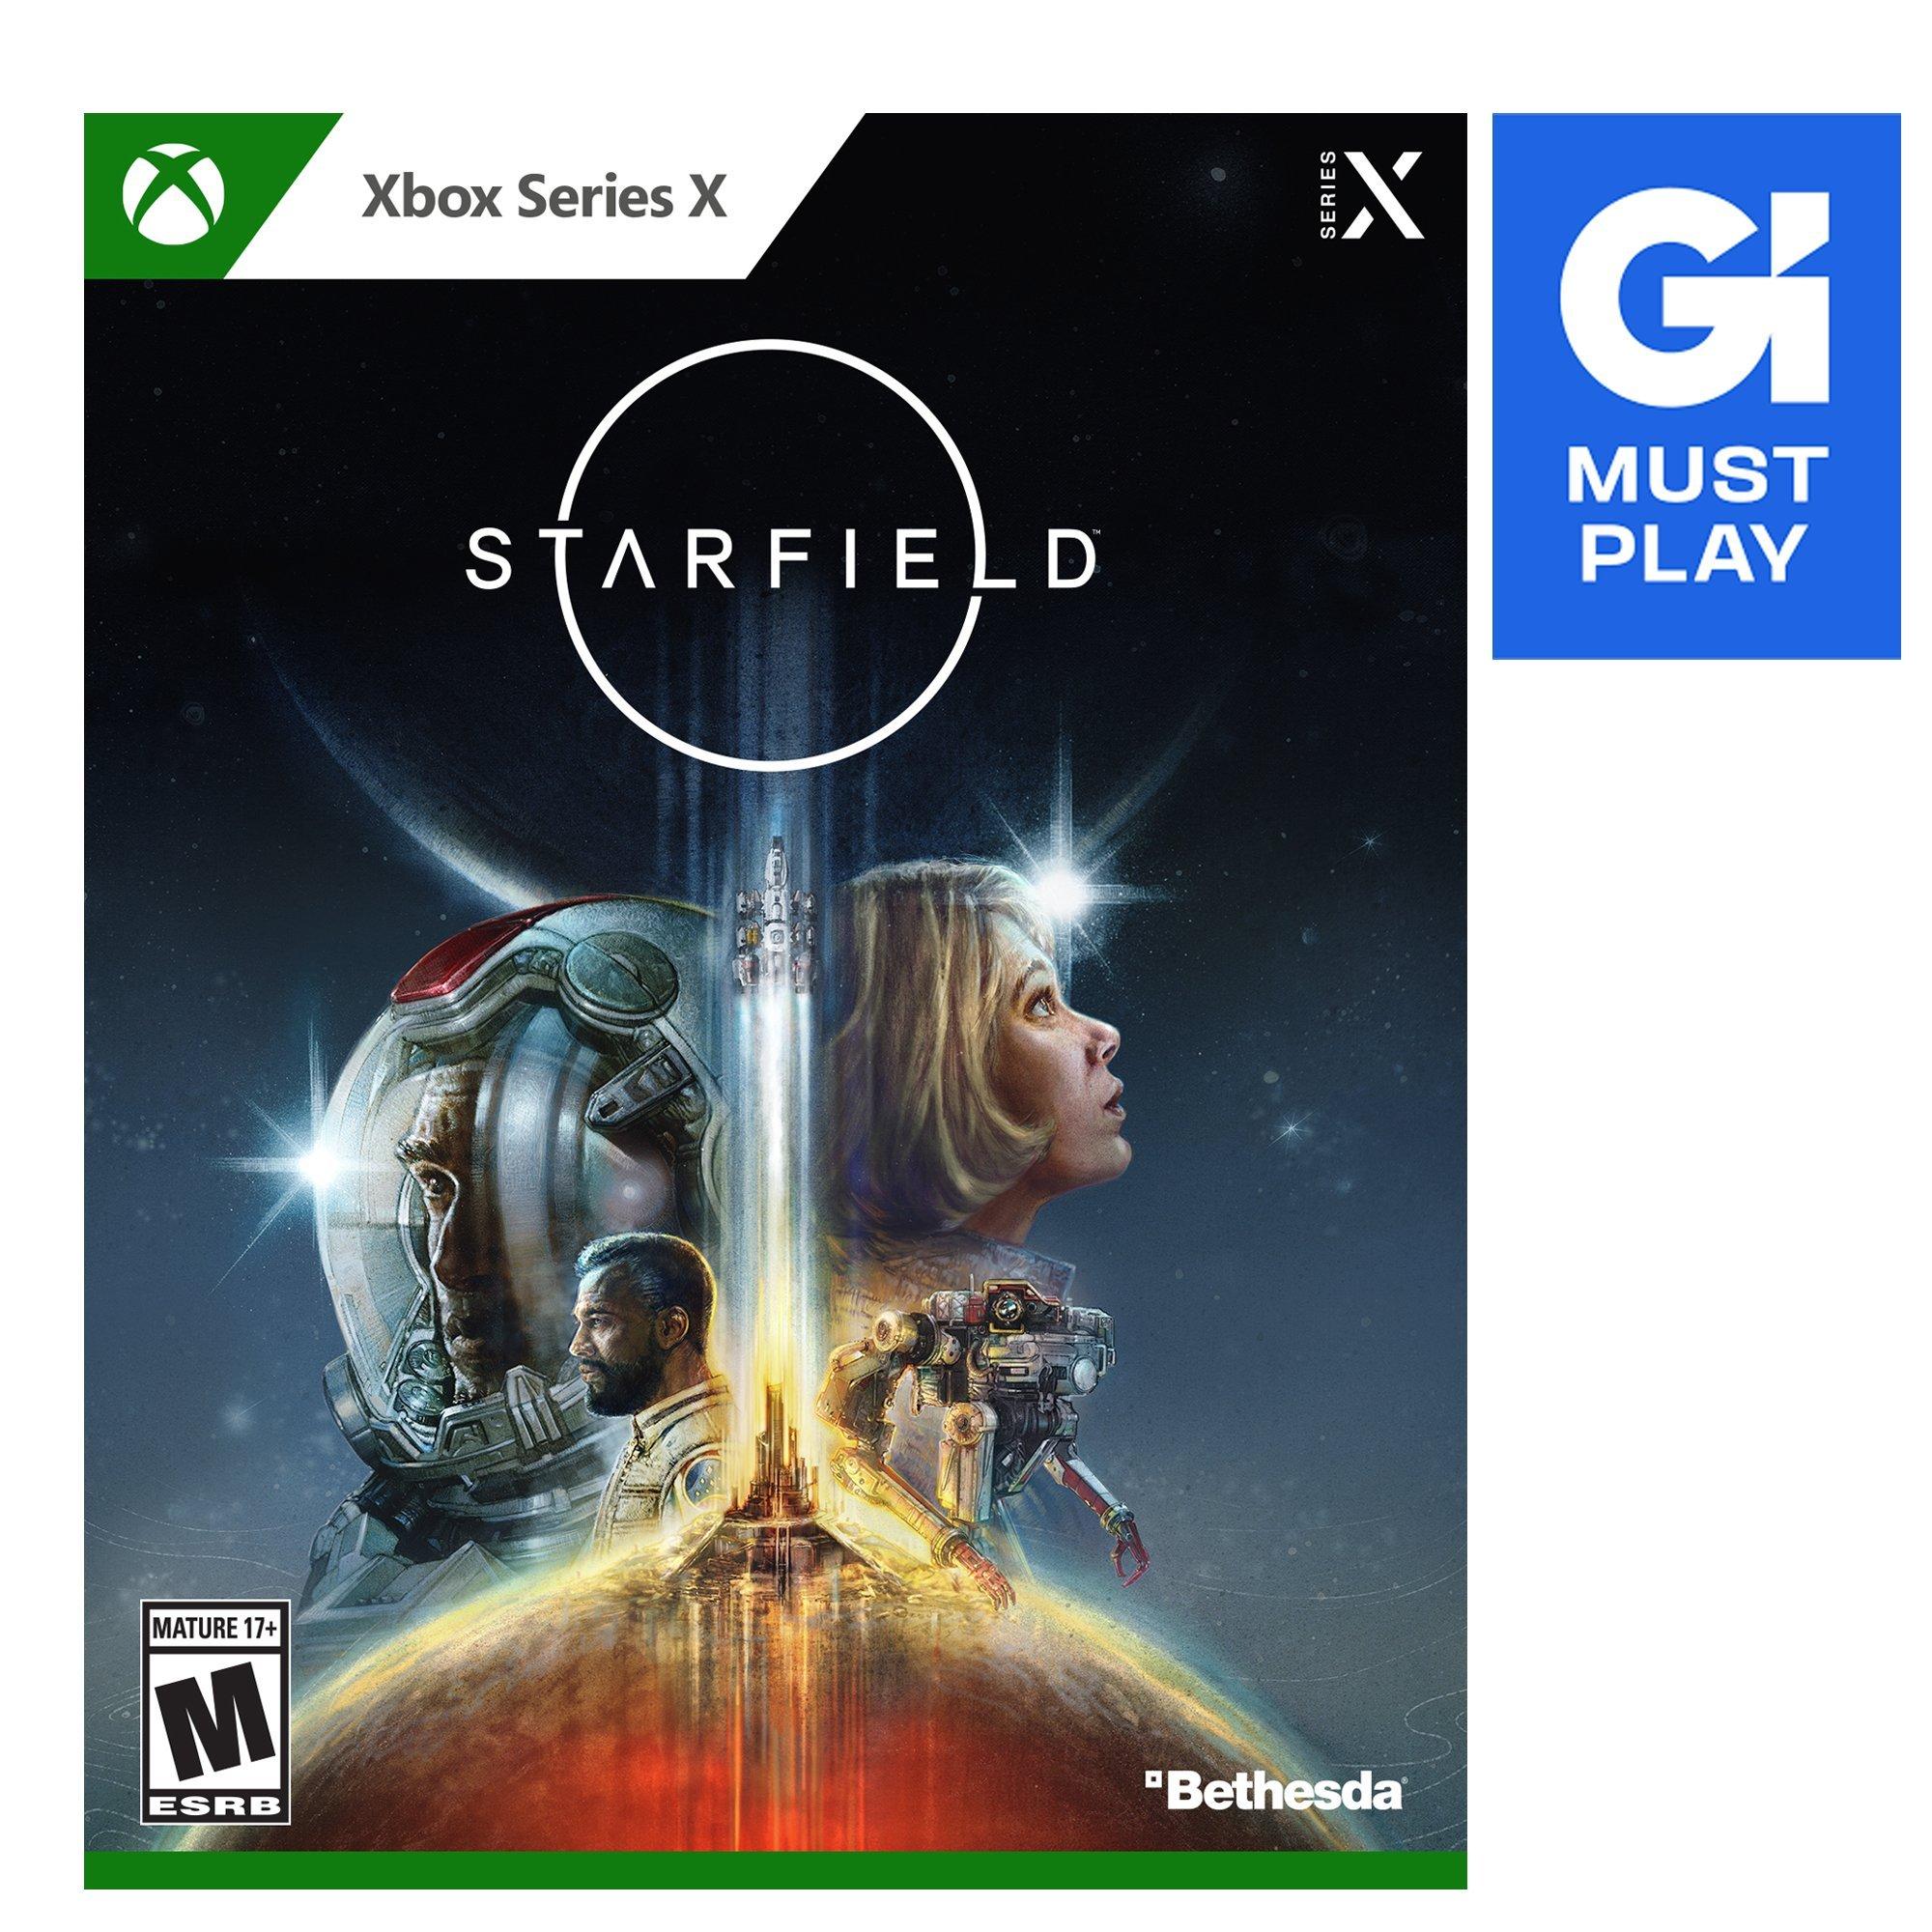 STARFIELD Stealth: How To Make It Actually *WORK* - STARFIELD XBOX